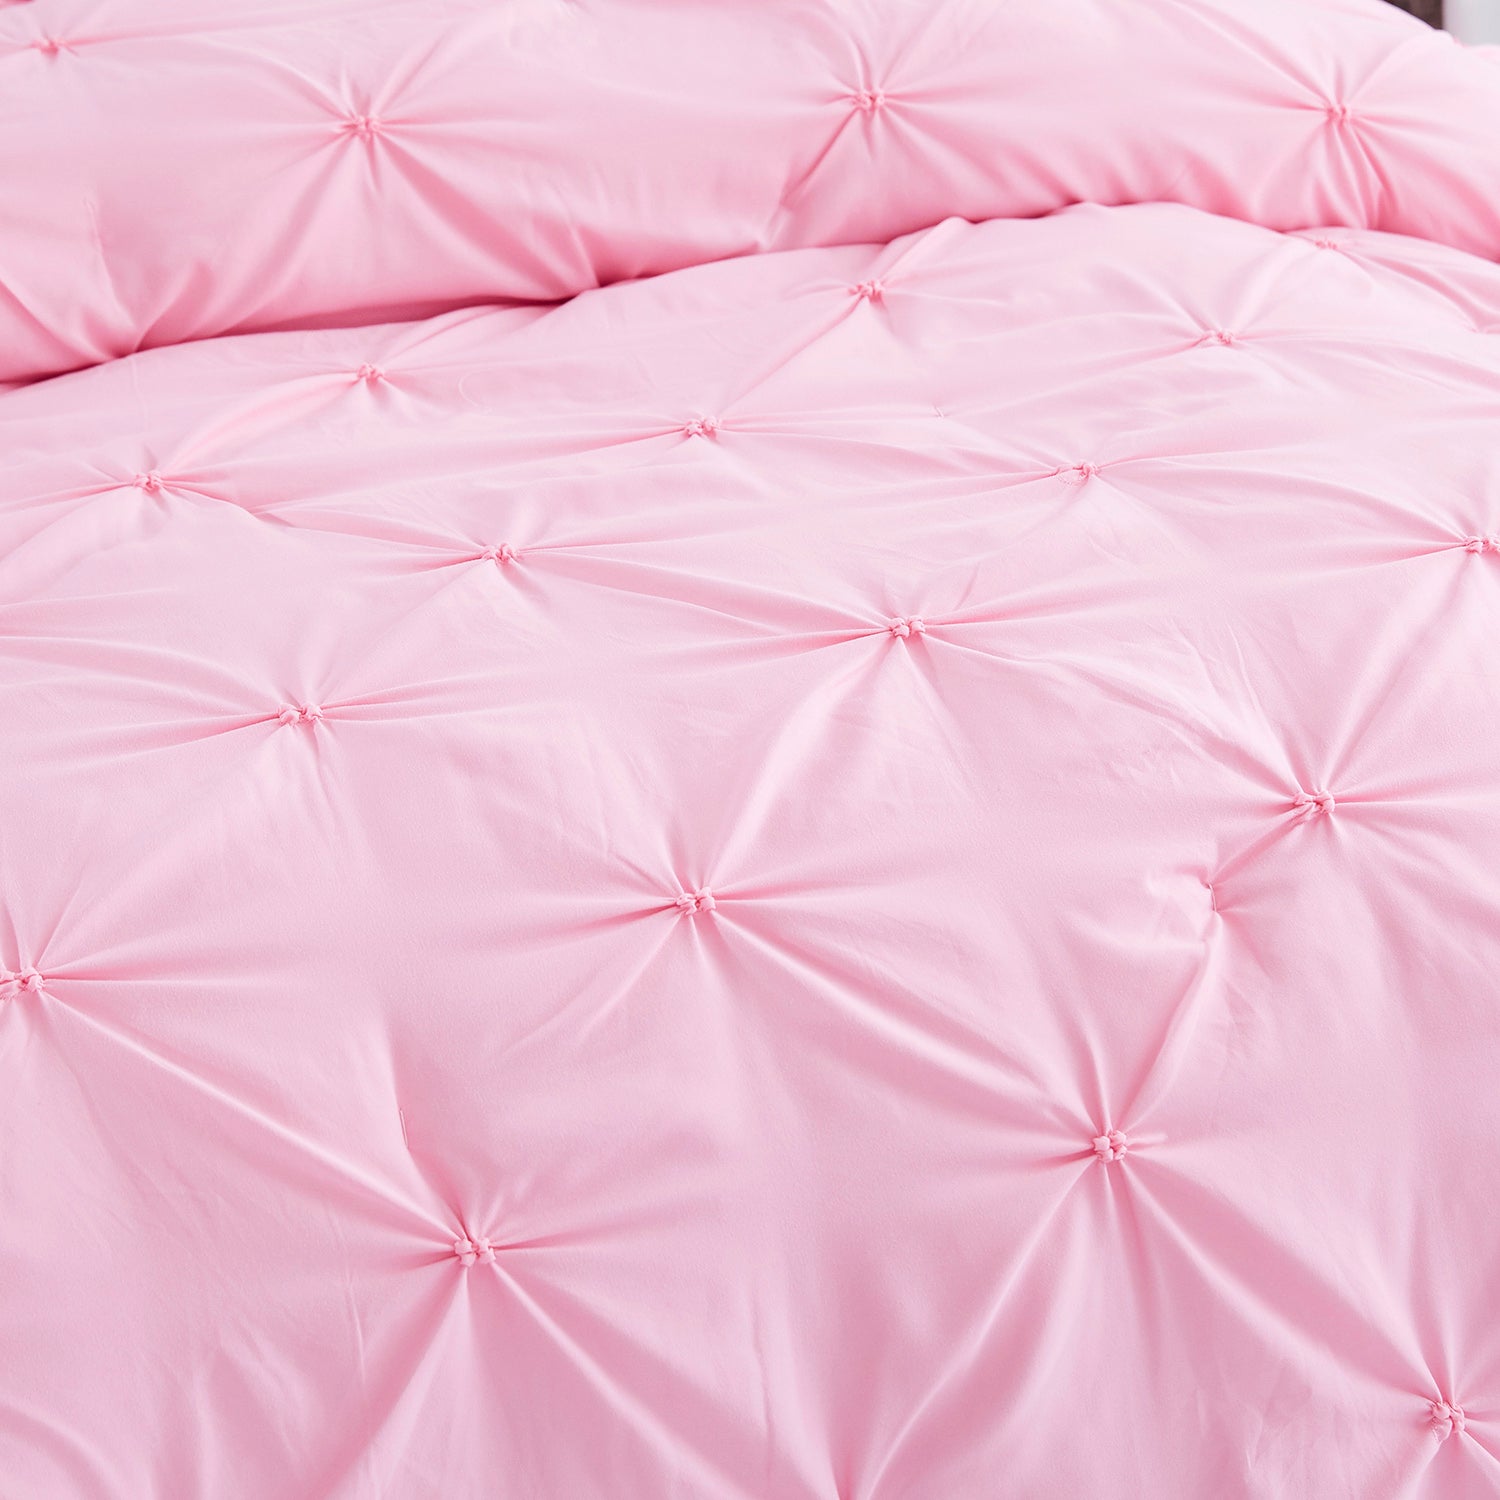 HANIA 5PC PINK BEDDING COMFORTER SET. RUFFLE & PATCHWORK, MICROFIBER FABRIC, FADE RESISTANT, SUPER SOFT, BED IN A BAG